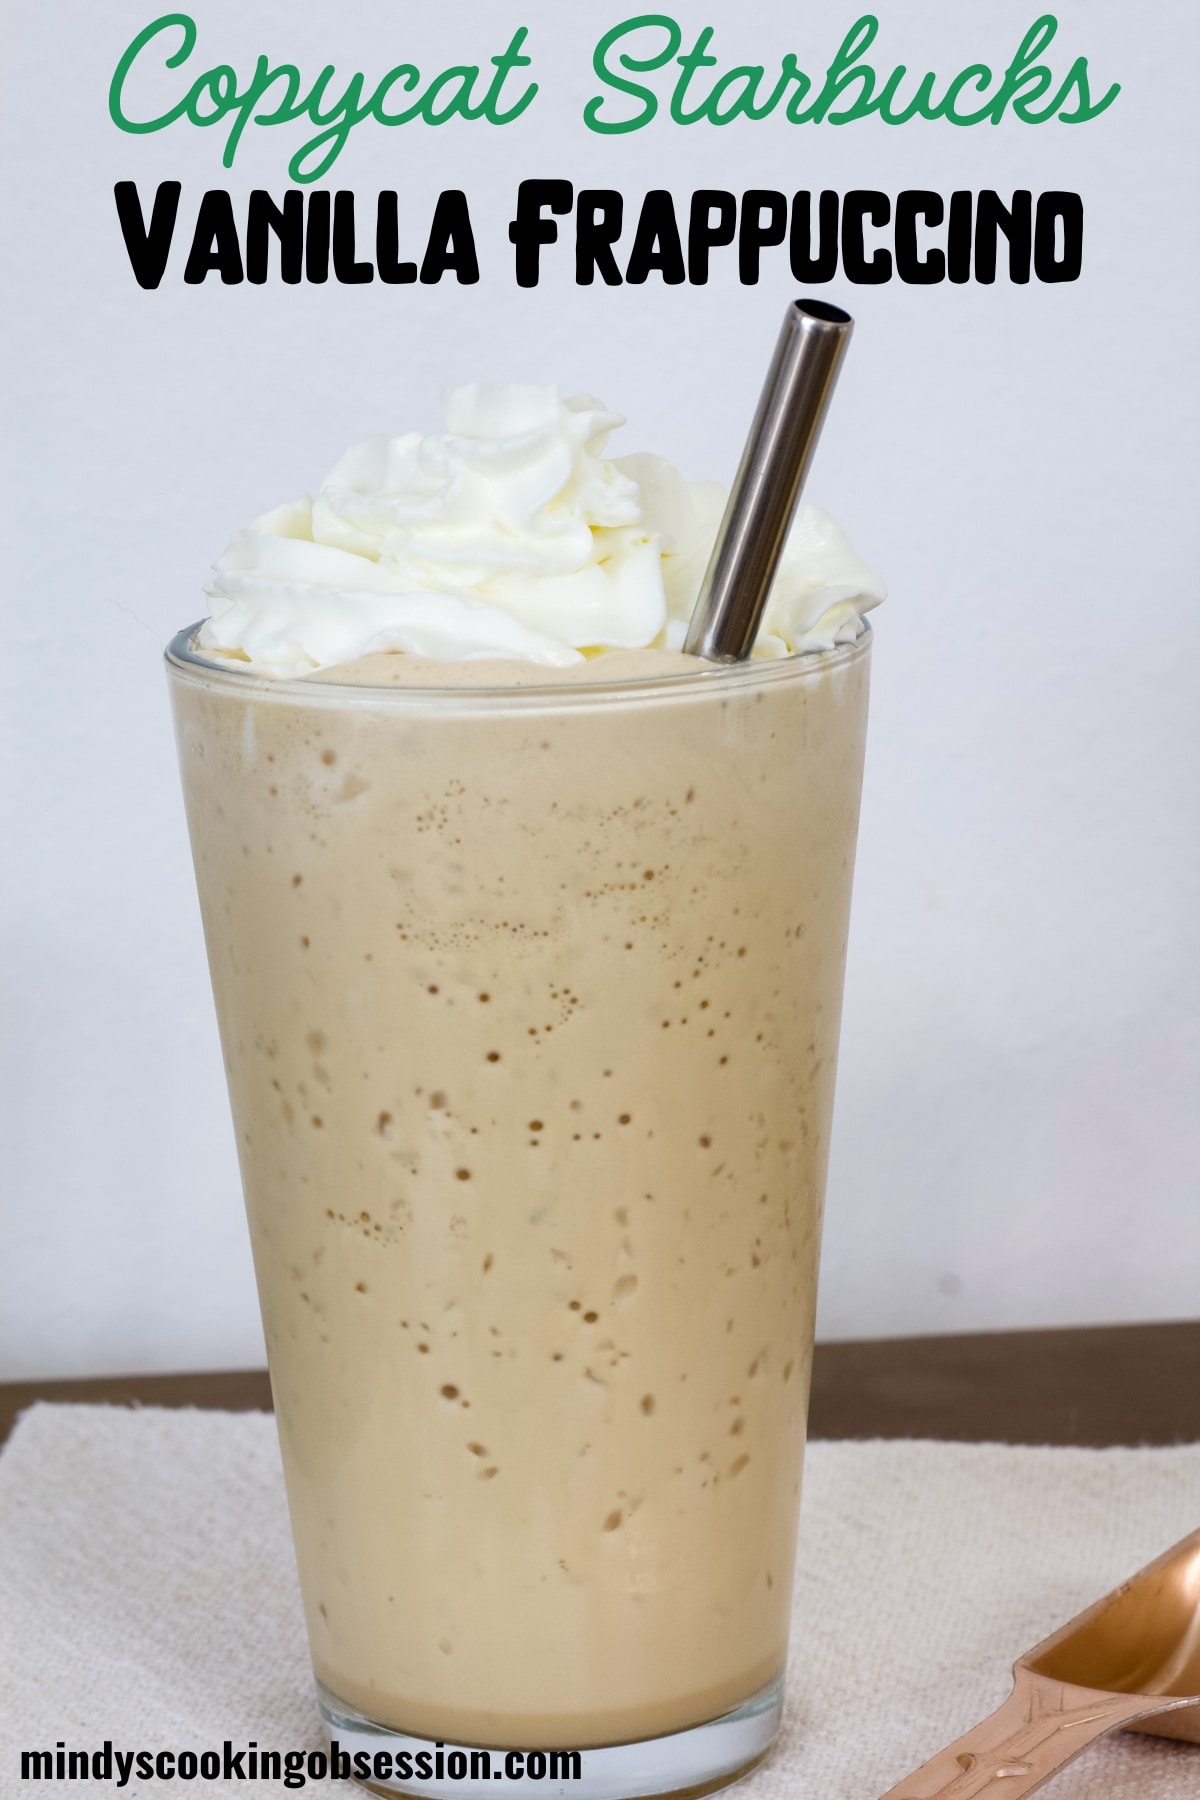 Learn how to recreate the delicious Starbucks Vanilla Frappuccino coffee with this simple recipe. Enjoy a refreshing, cold and creamy drink anytime. via @mindyscookingobsession